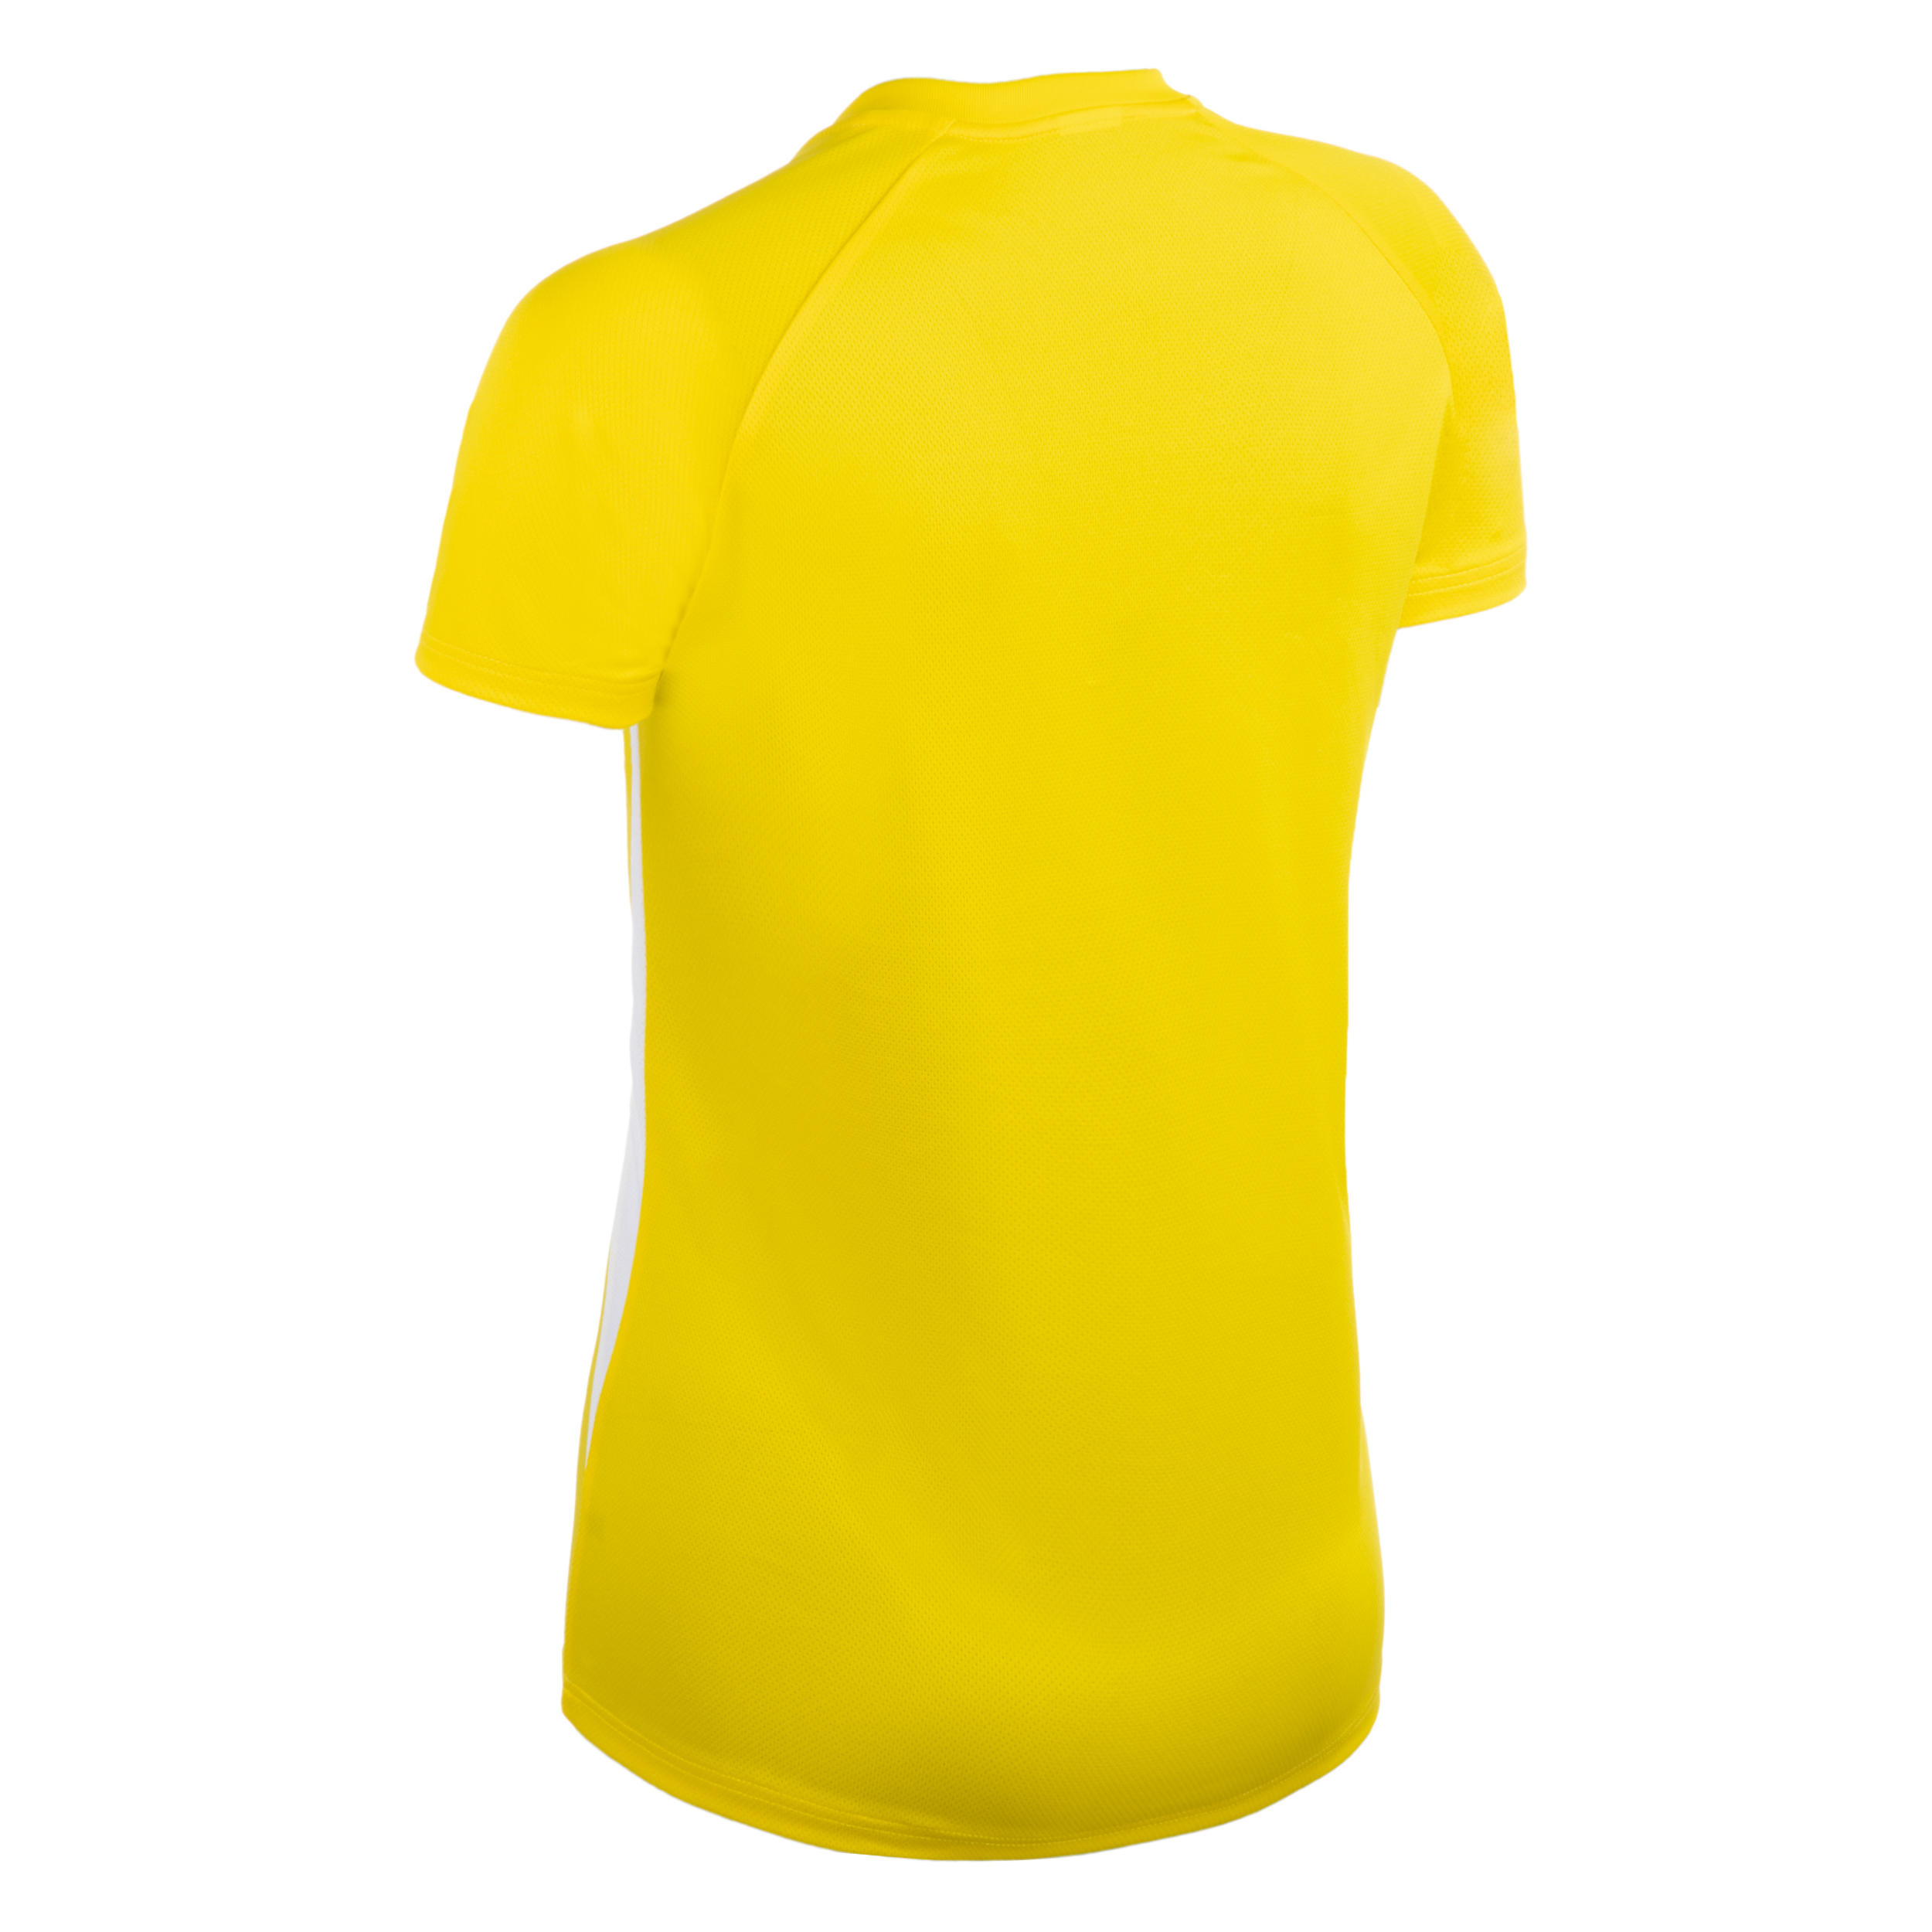 V100 Women's Volleyball Jersey - Yellow 2/8